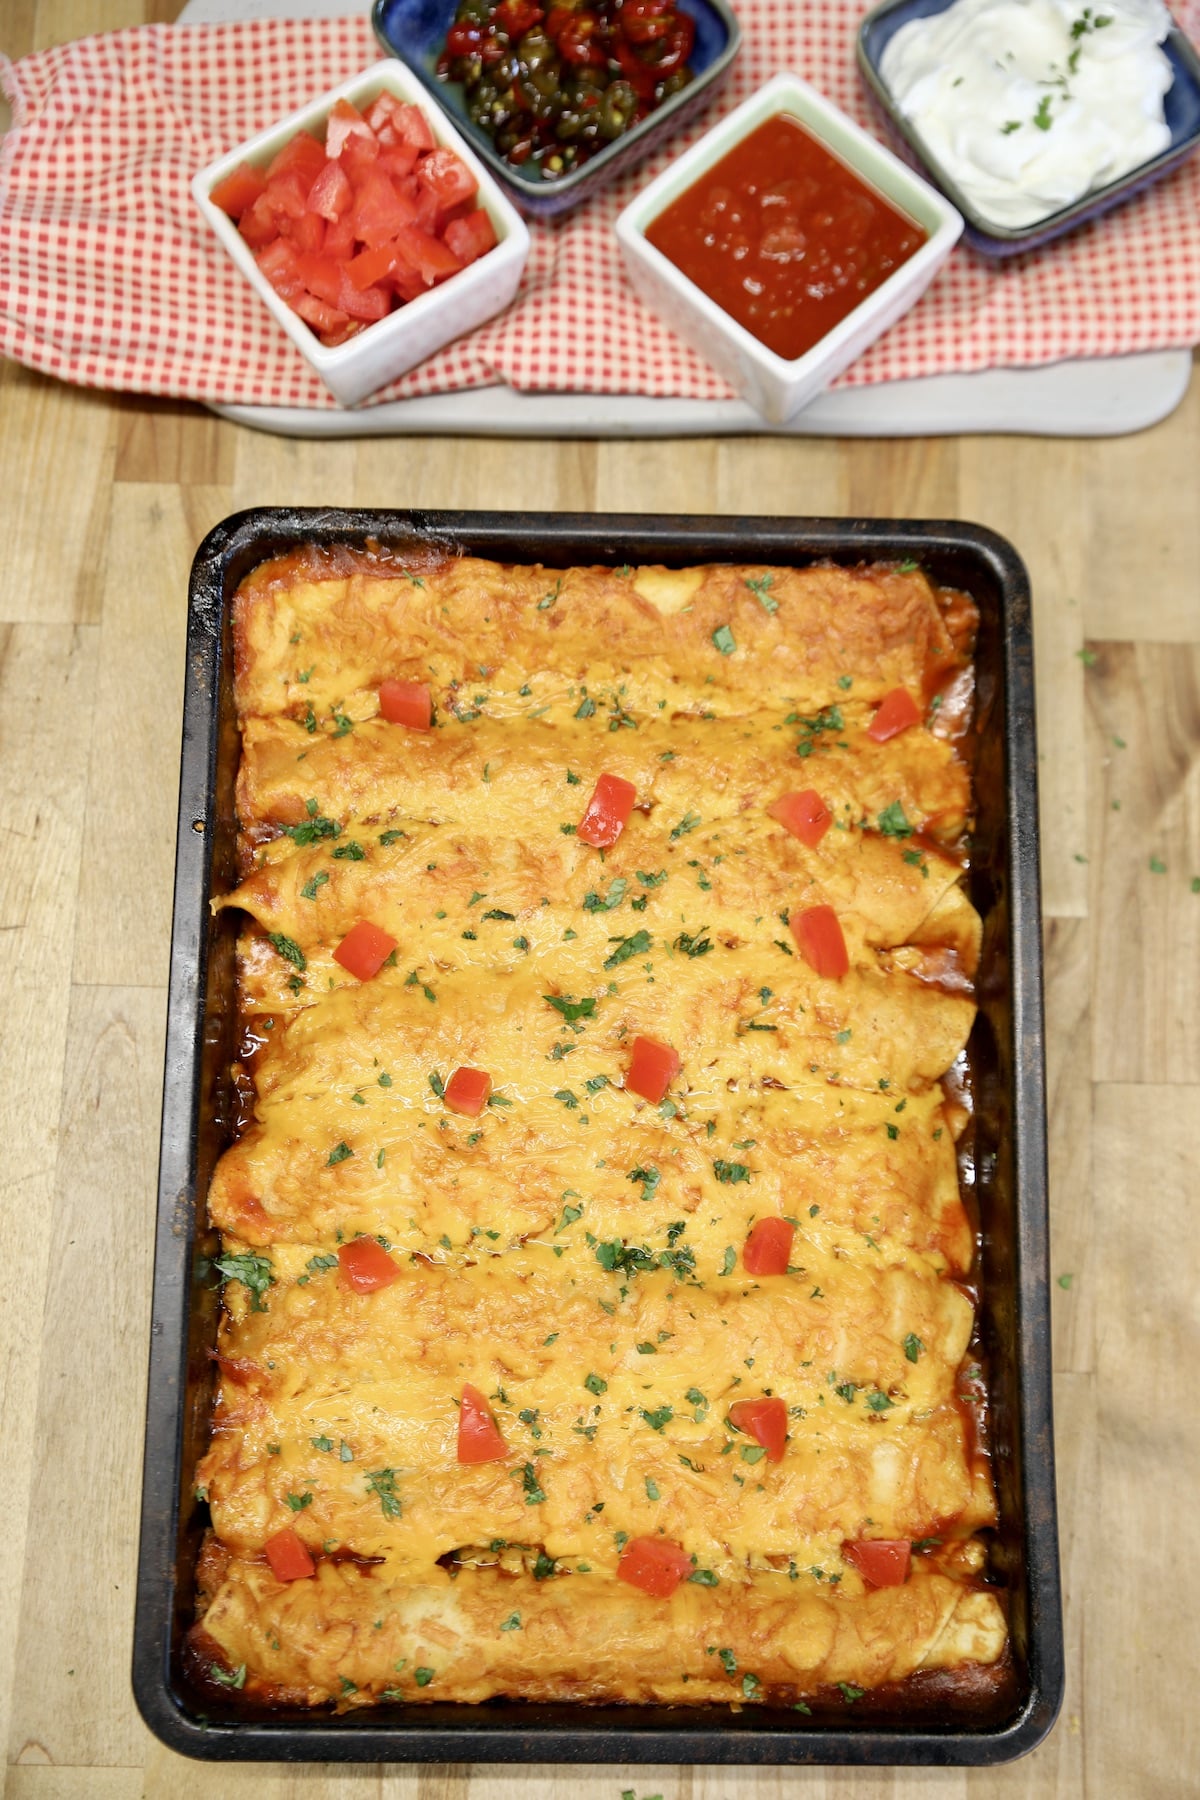 Pan of enchiladas with bowls of condiments.